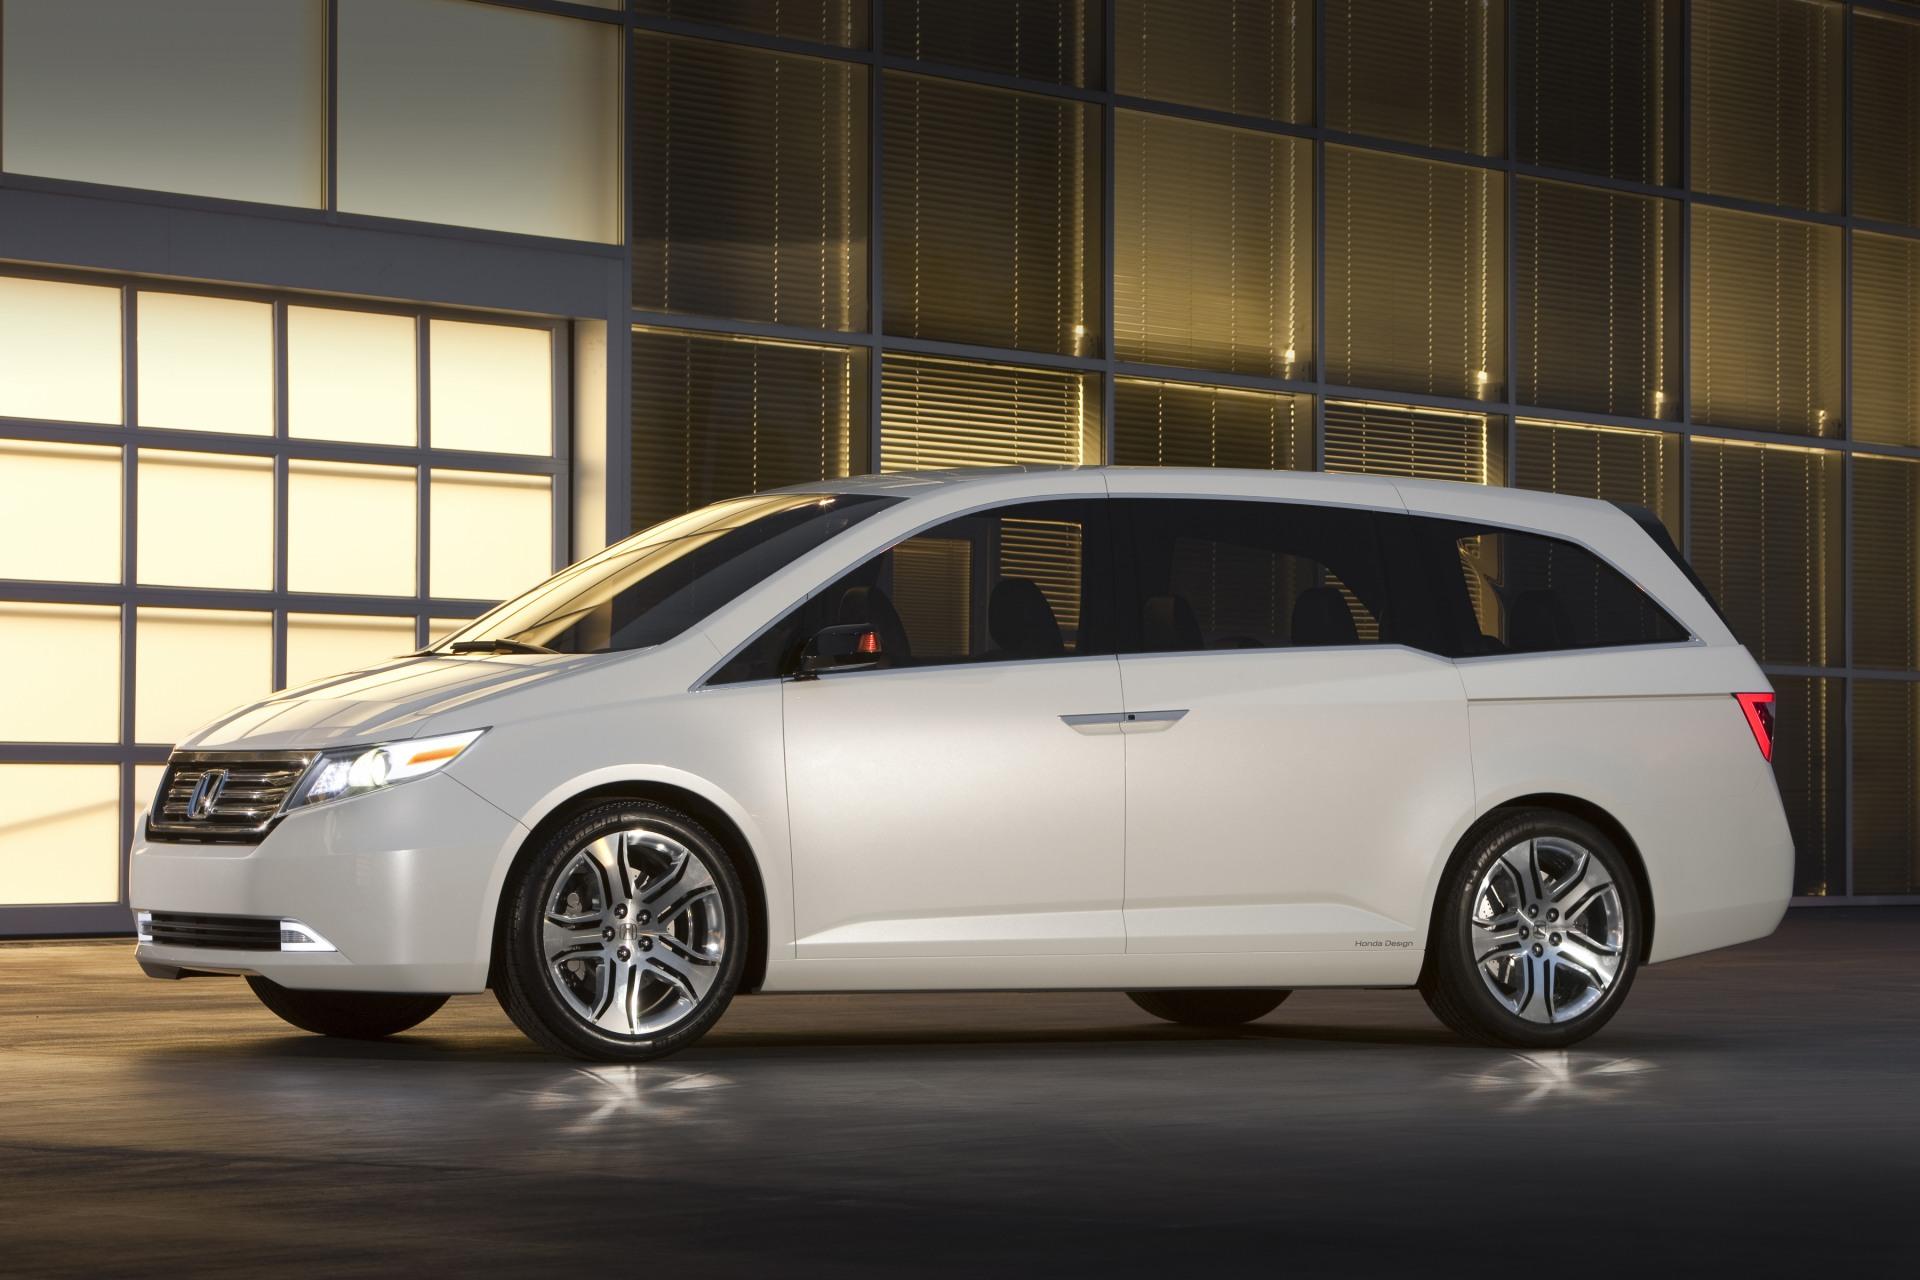 2010 Honda Odyssey Concept News and Information, Research, and Pricing